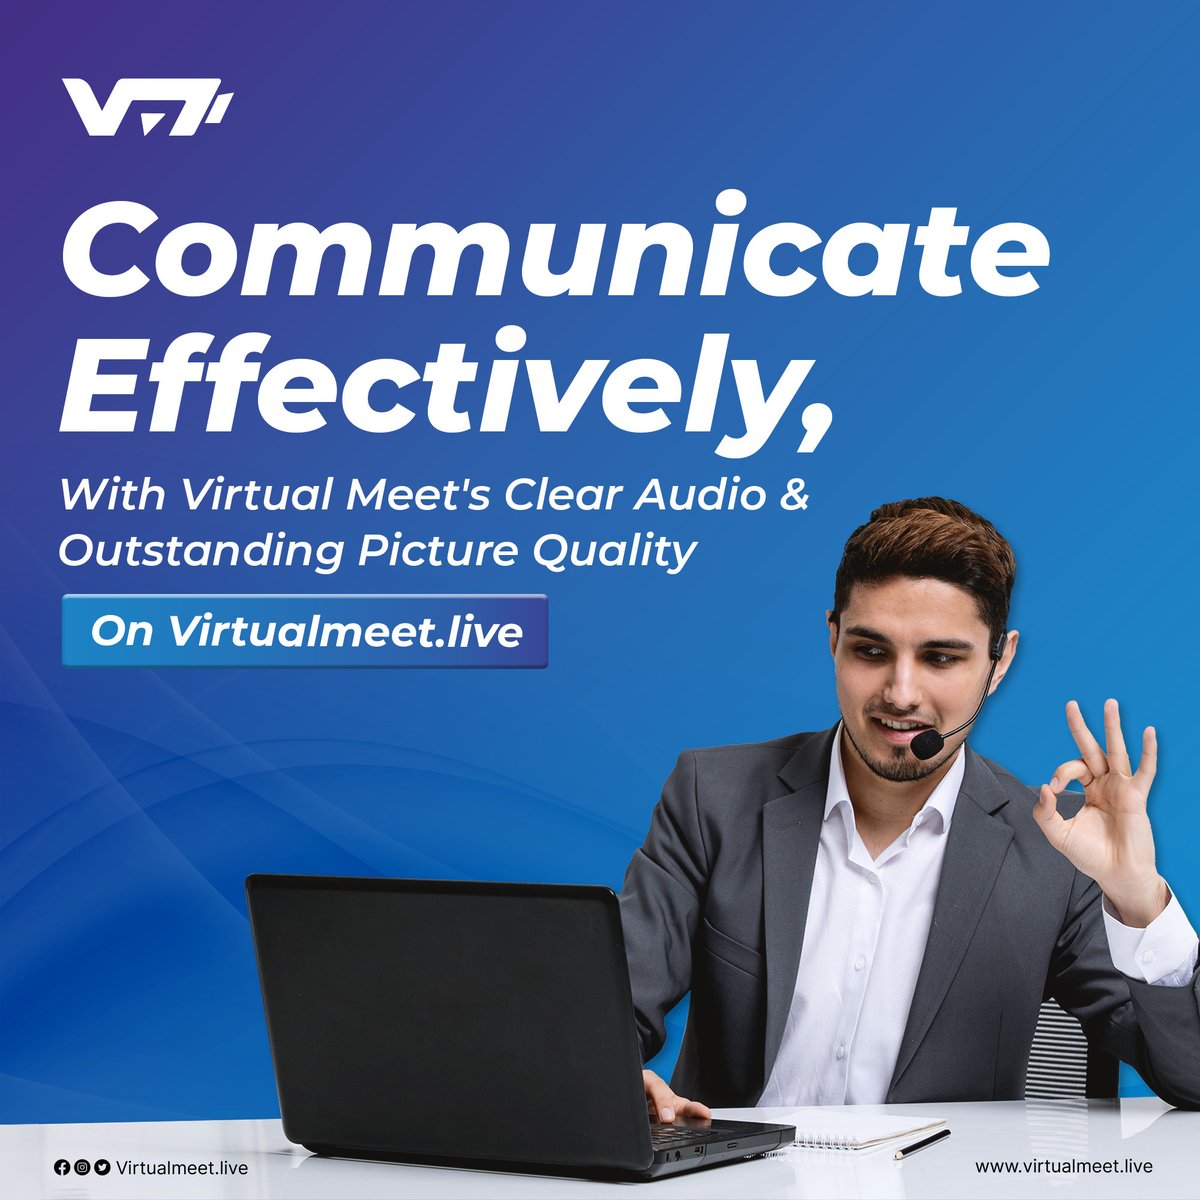 Experience crystal-clear communication with Virtual Meet's pristine audio and stunning visuals. 

#VirtualMeet #ClearCommunication #OutstandingQuality #RemoteCollaboration #VirtualConferencing #HighDefinitionVideo #RemoteMeetings #DigitalCollaboration #GlobalConnectivity